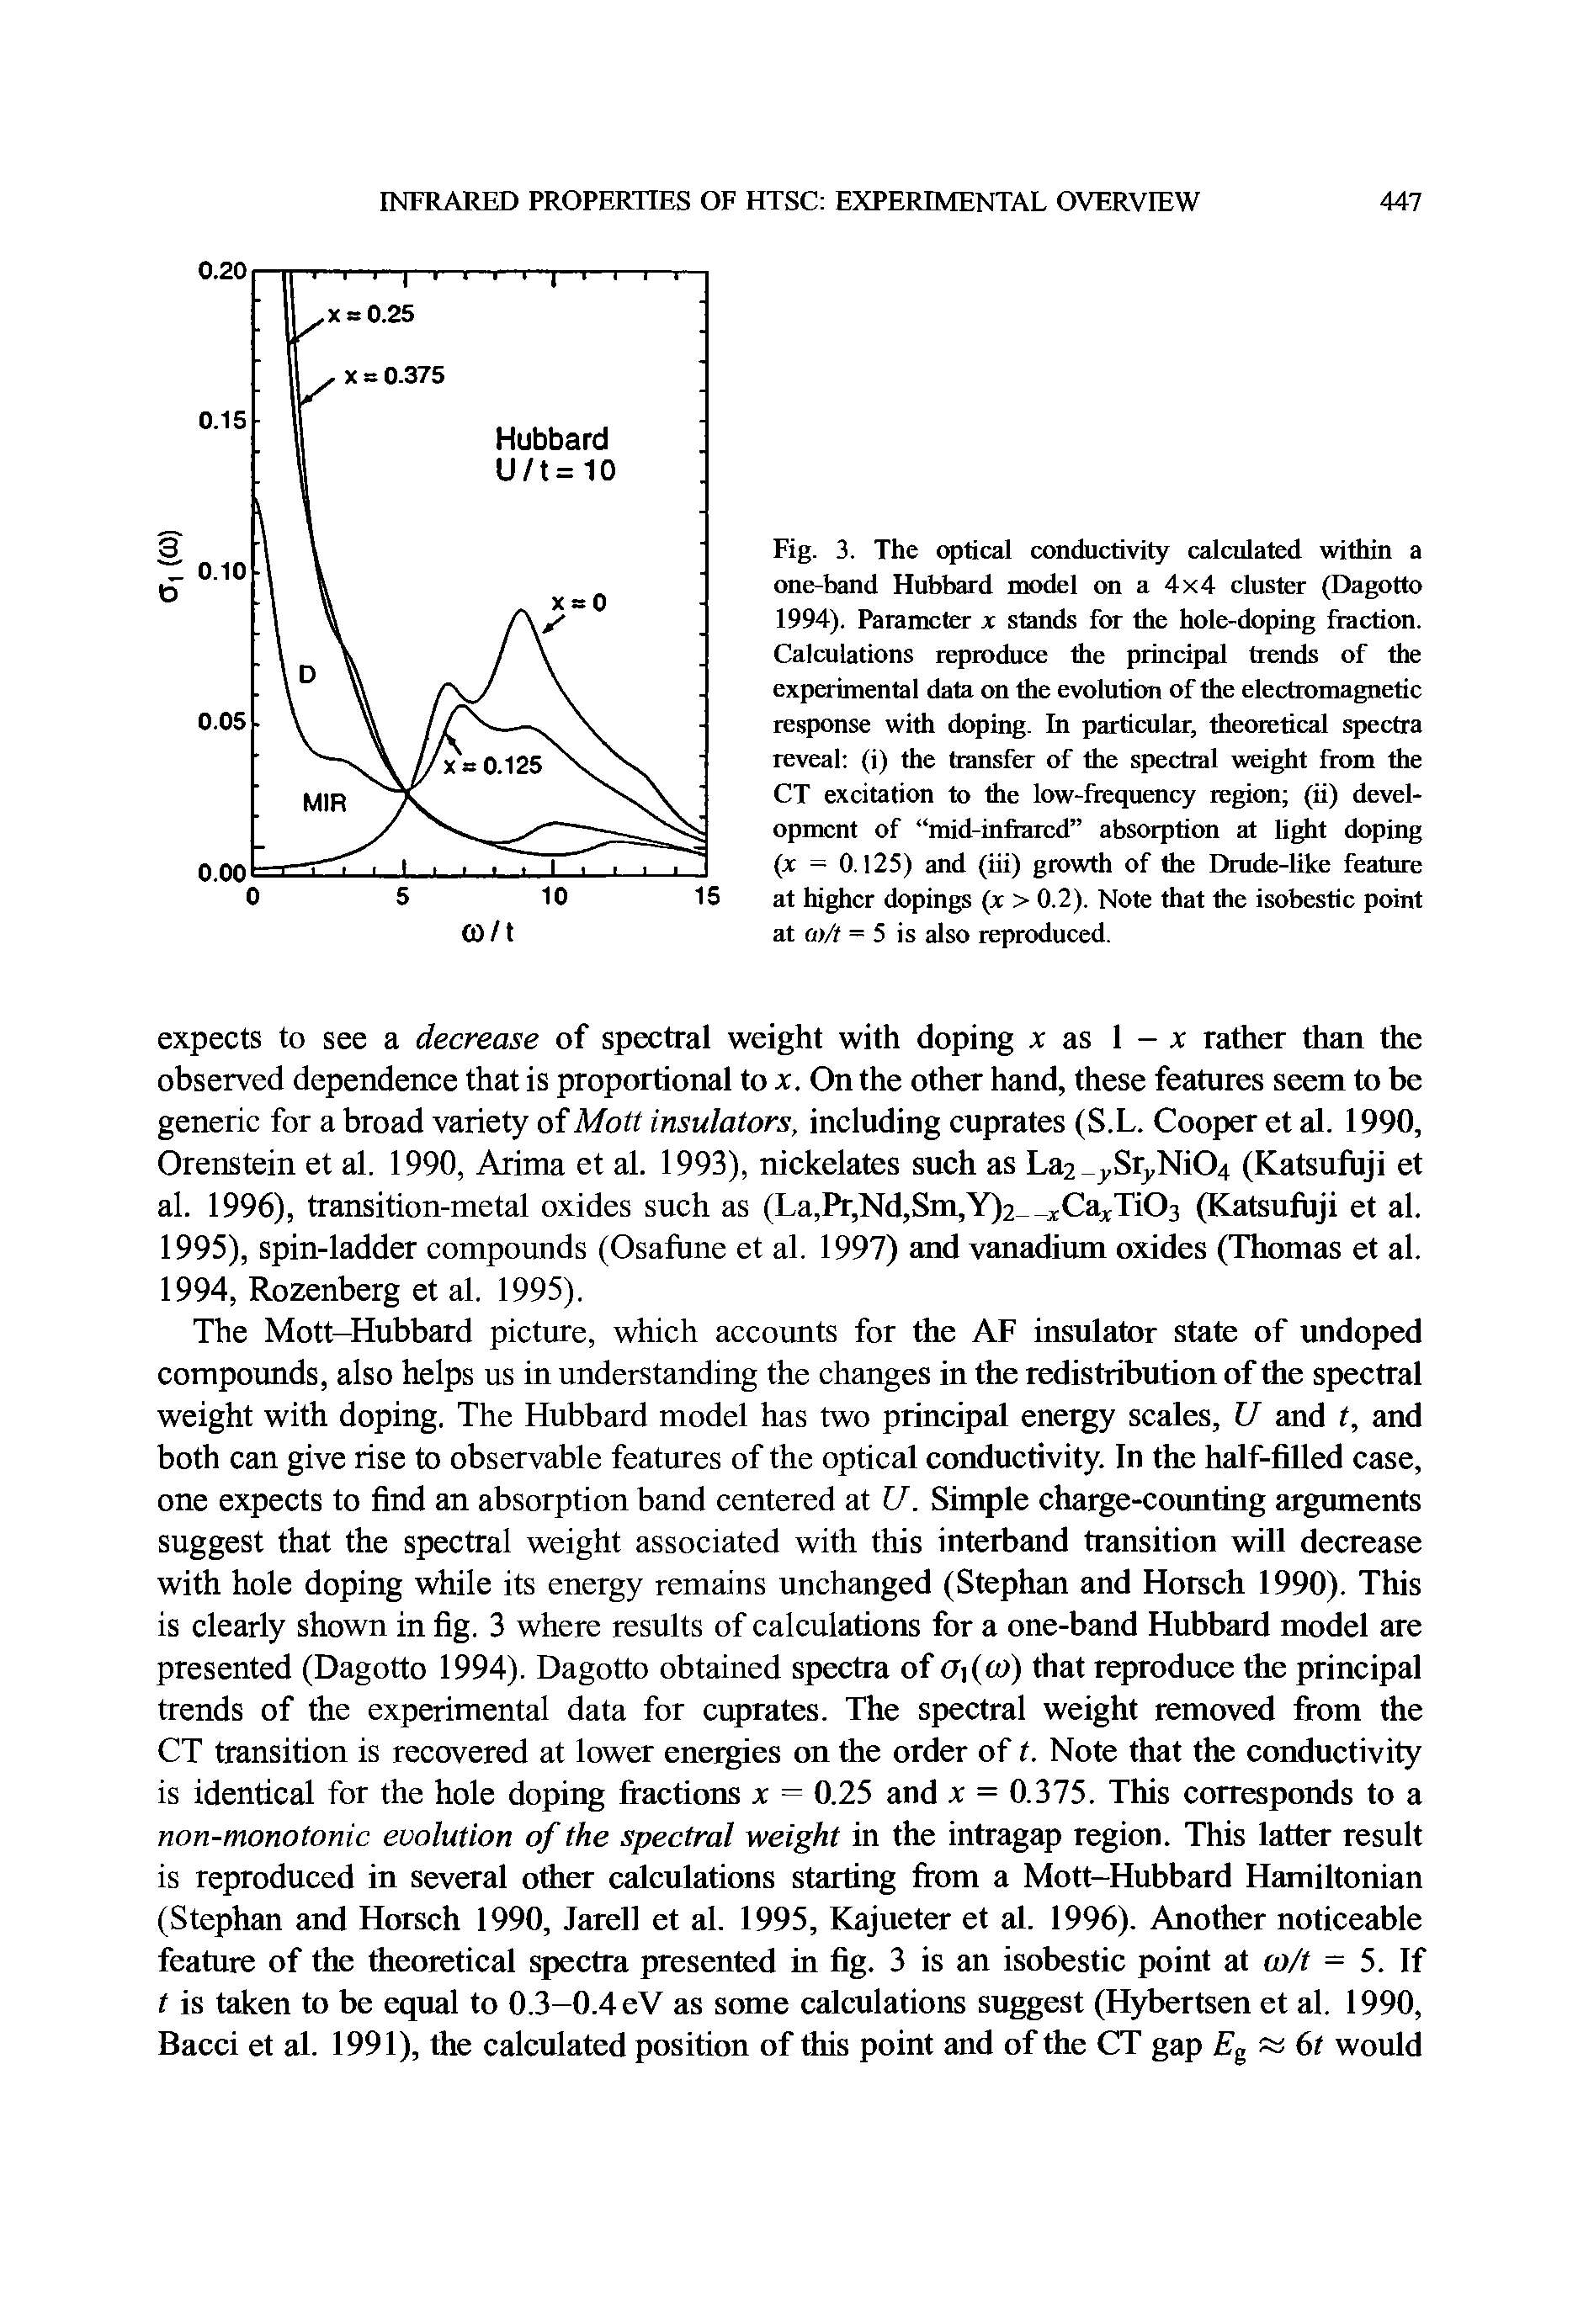 Fig. 3. The < tical conductivity calculated within a one-band Hubbard model on a 4x4 cluster (Dagotto 1994). Parameter x stands for the hole-doping fraction. Calculations reproduce the principal trends of the experimental data on the evolution of the electromagnetic response with doping. In particular, theoretical spectra reveal (i) the transfer of the spectral weight from the CT excitation to the iow-ftequency region (ii) development of mid-infiared absorption at light doping (x = 0.125) and (iii) growth of the Drude-like feature at higher dopings (x > 0.2). Note that the isobestic point at m/t = 5 is also reproduced.